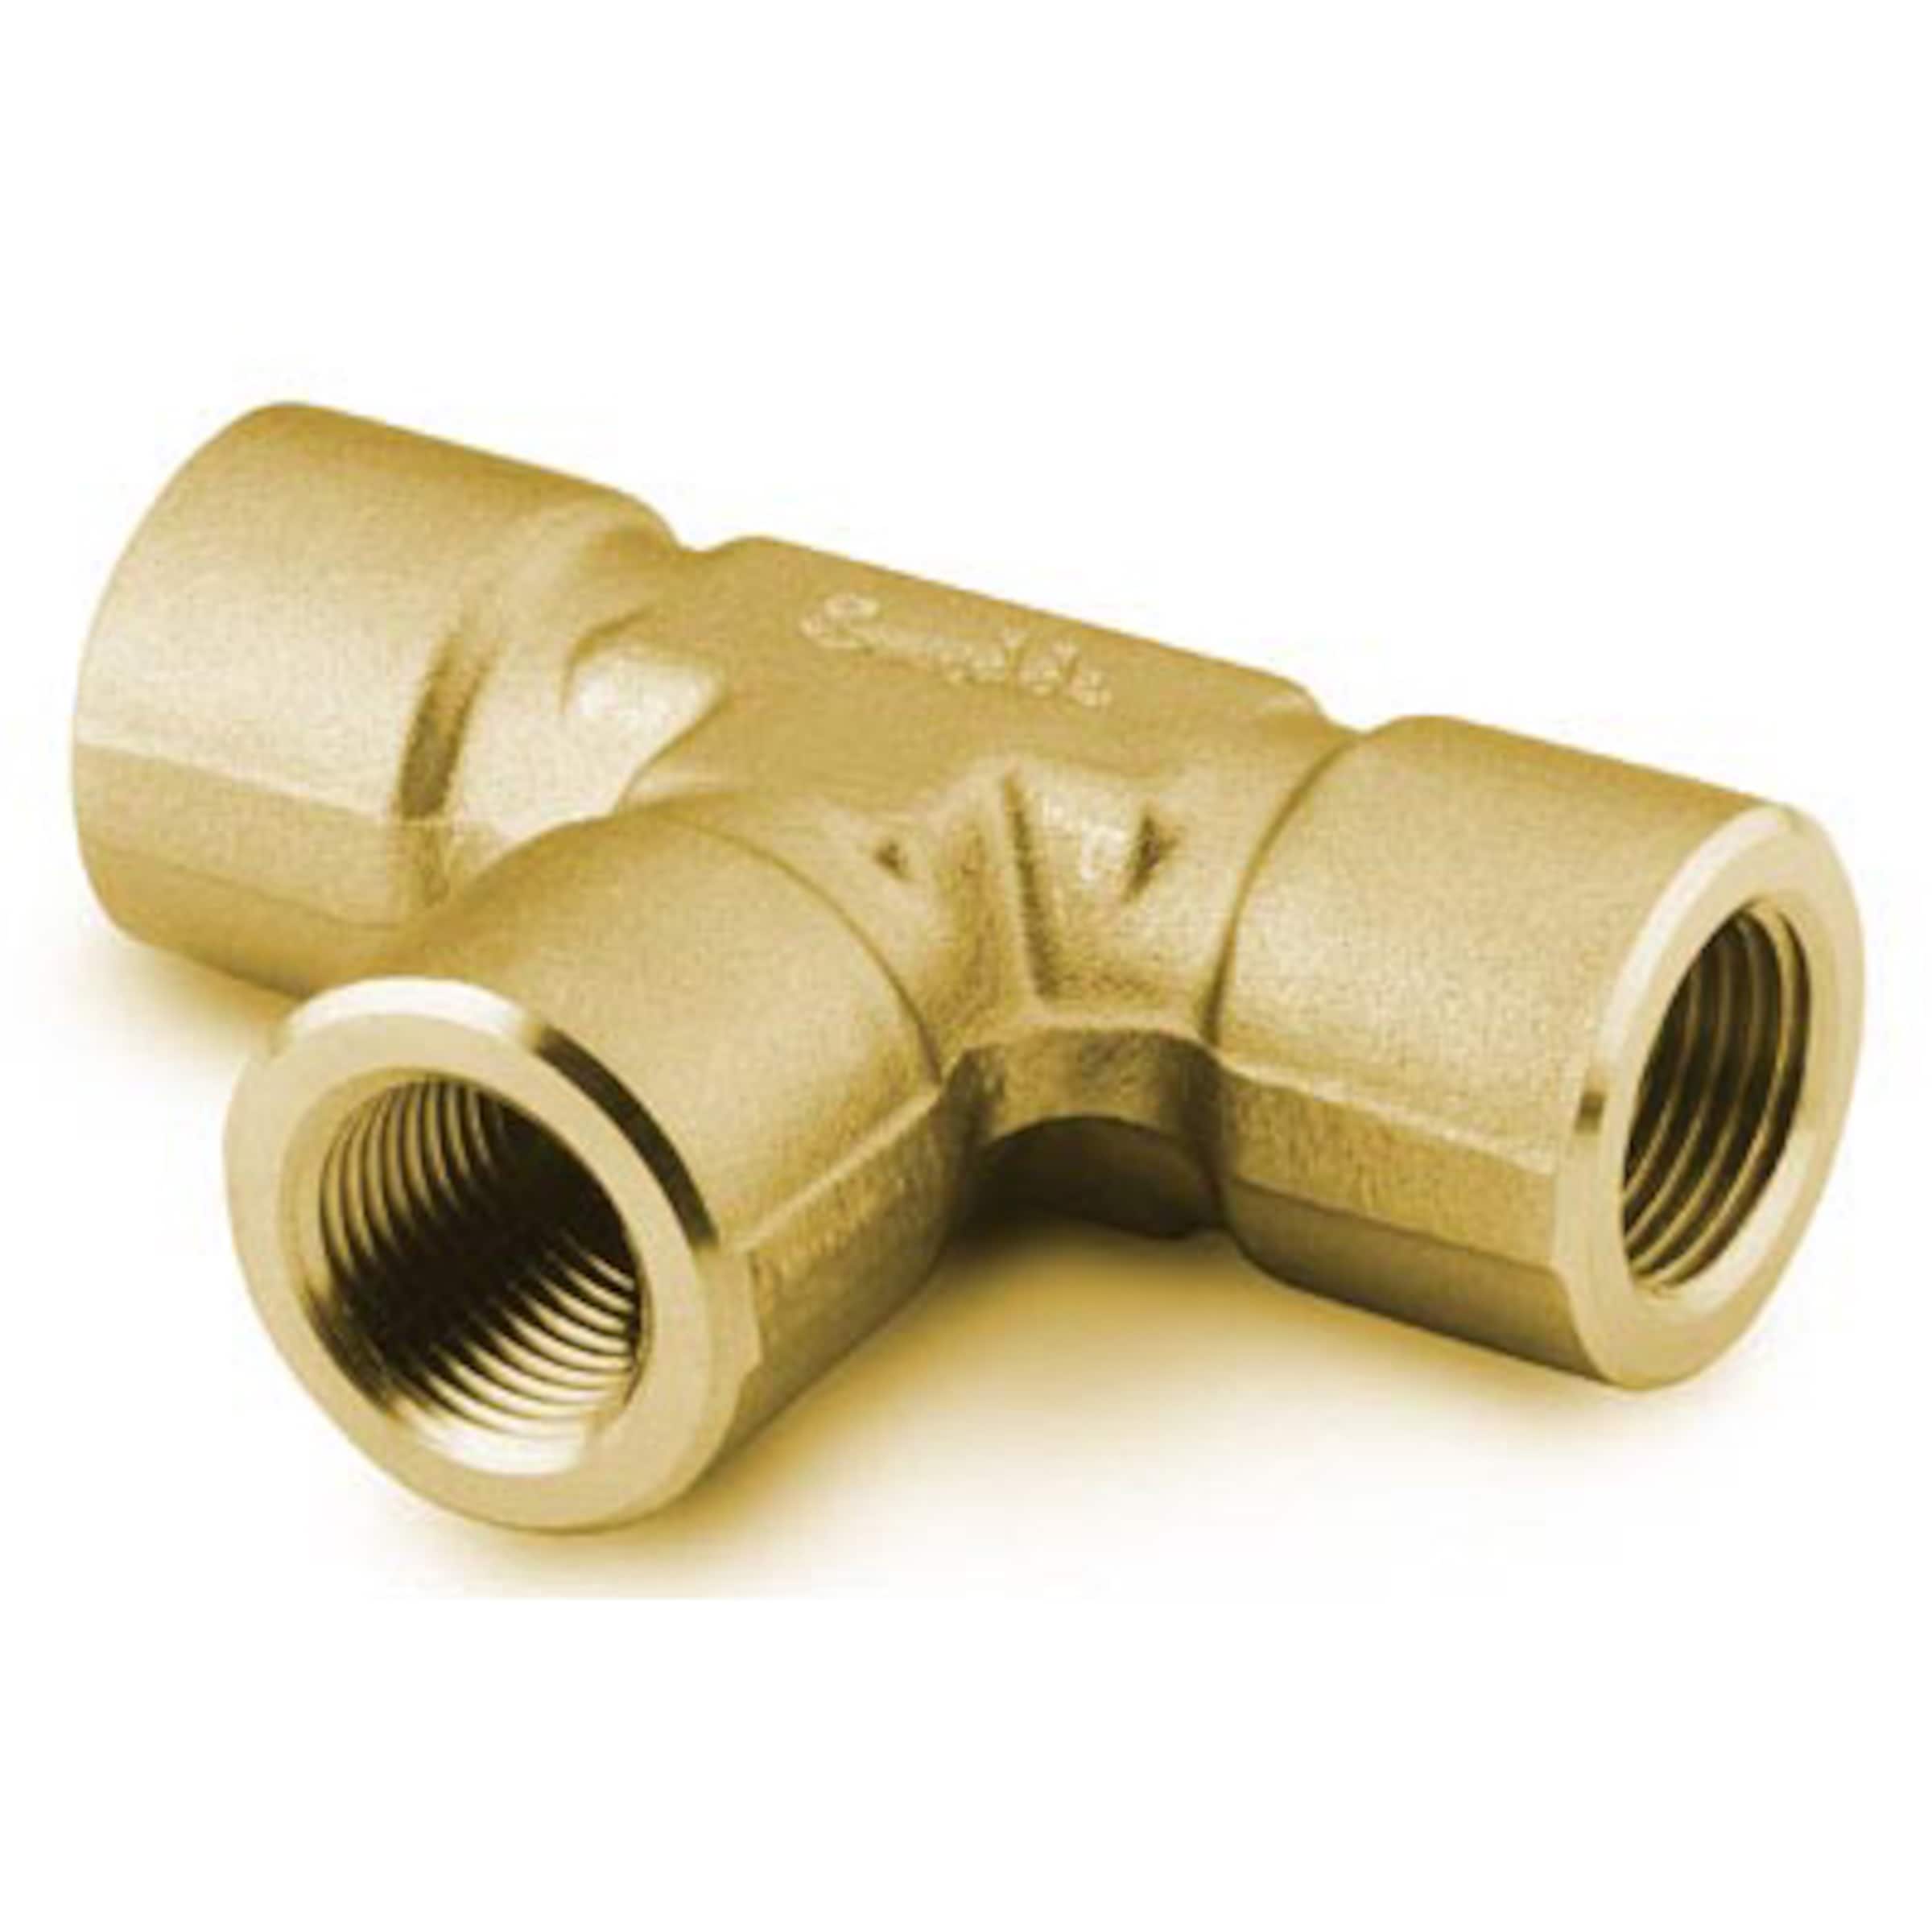 Swagelok Fitting, Brass, 1/4 to 1/4 NPT Male Connector, 10-pk